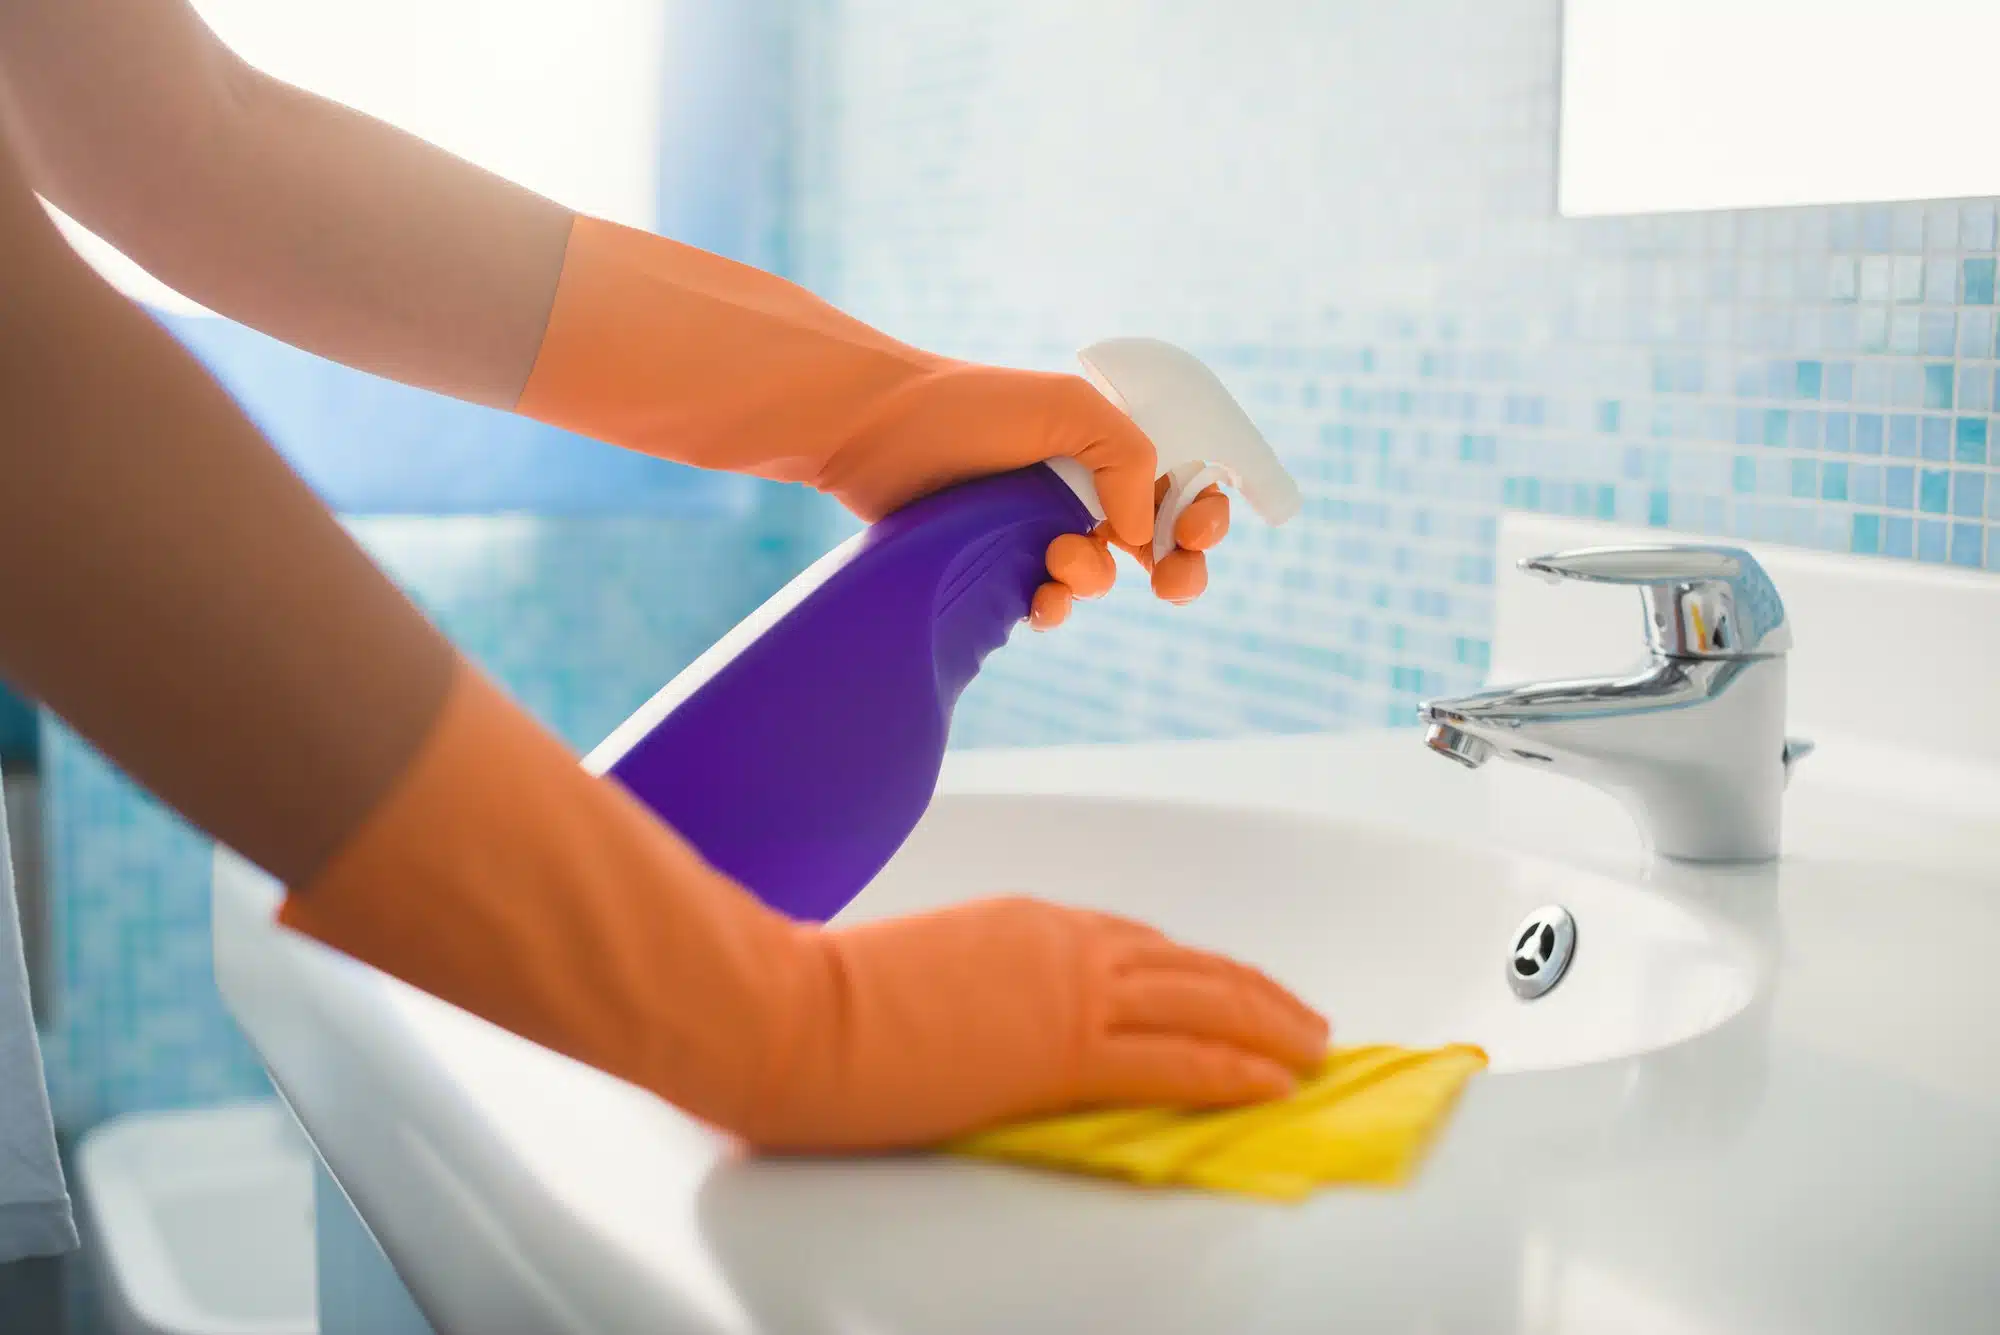 Squeaky Clean: Reviewing the Top Bathroom Cleaning Products That Actually Work